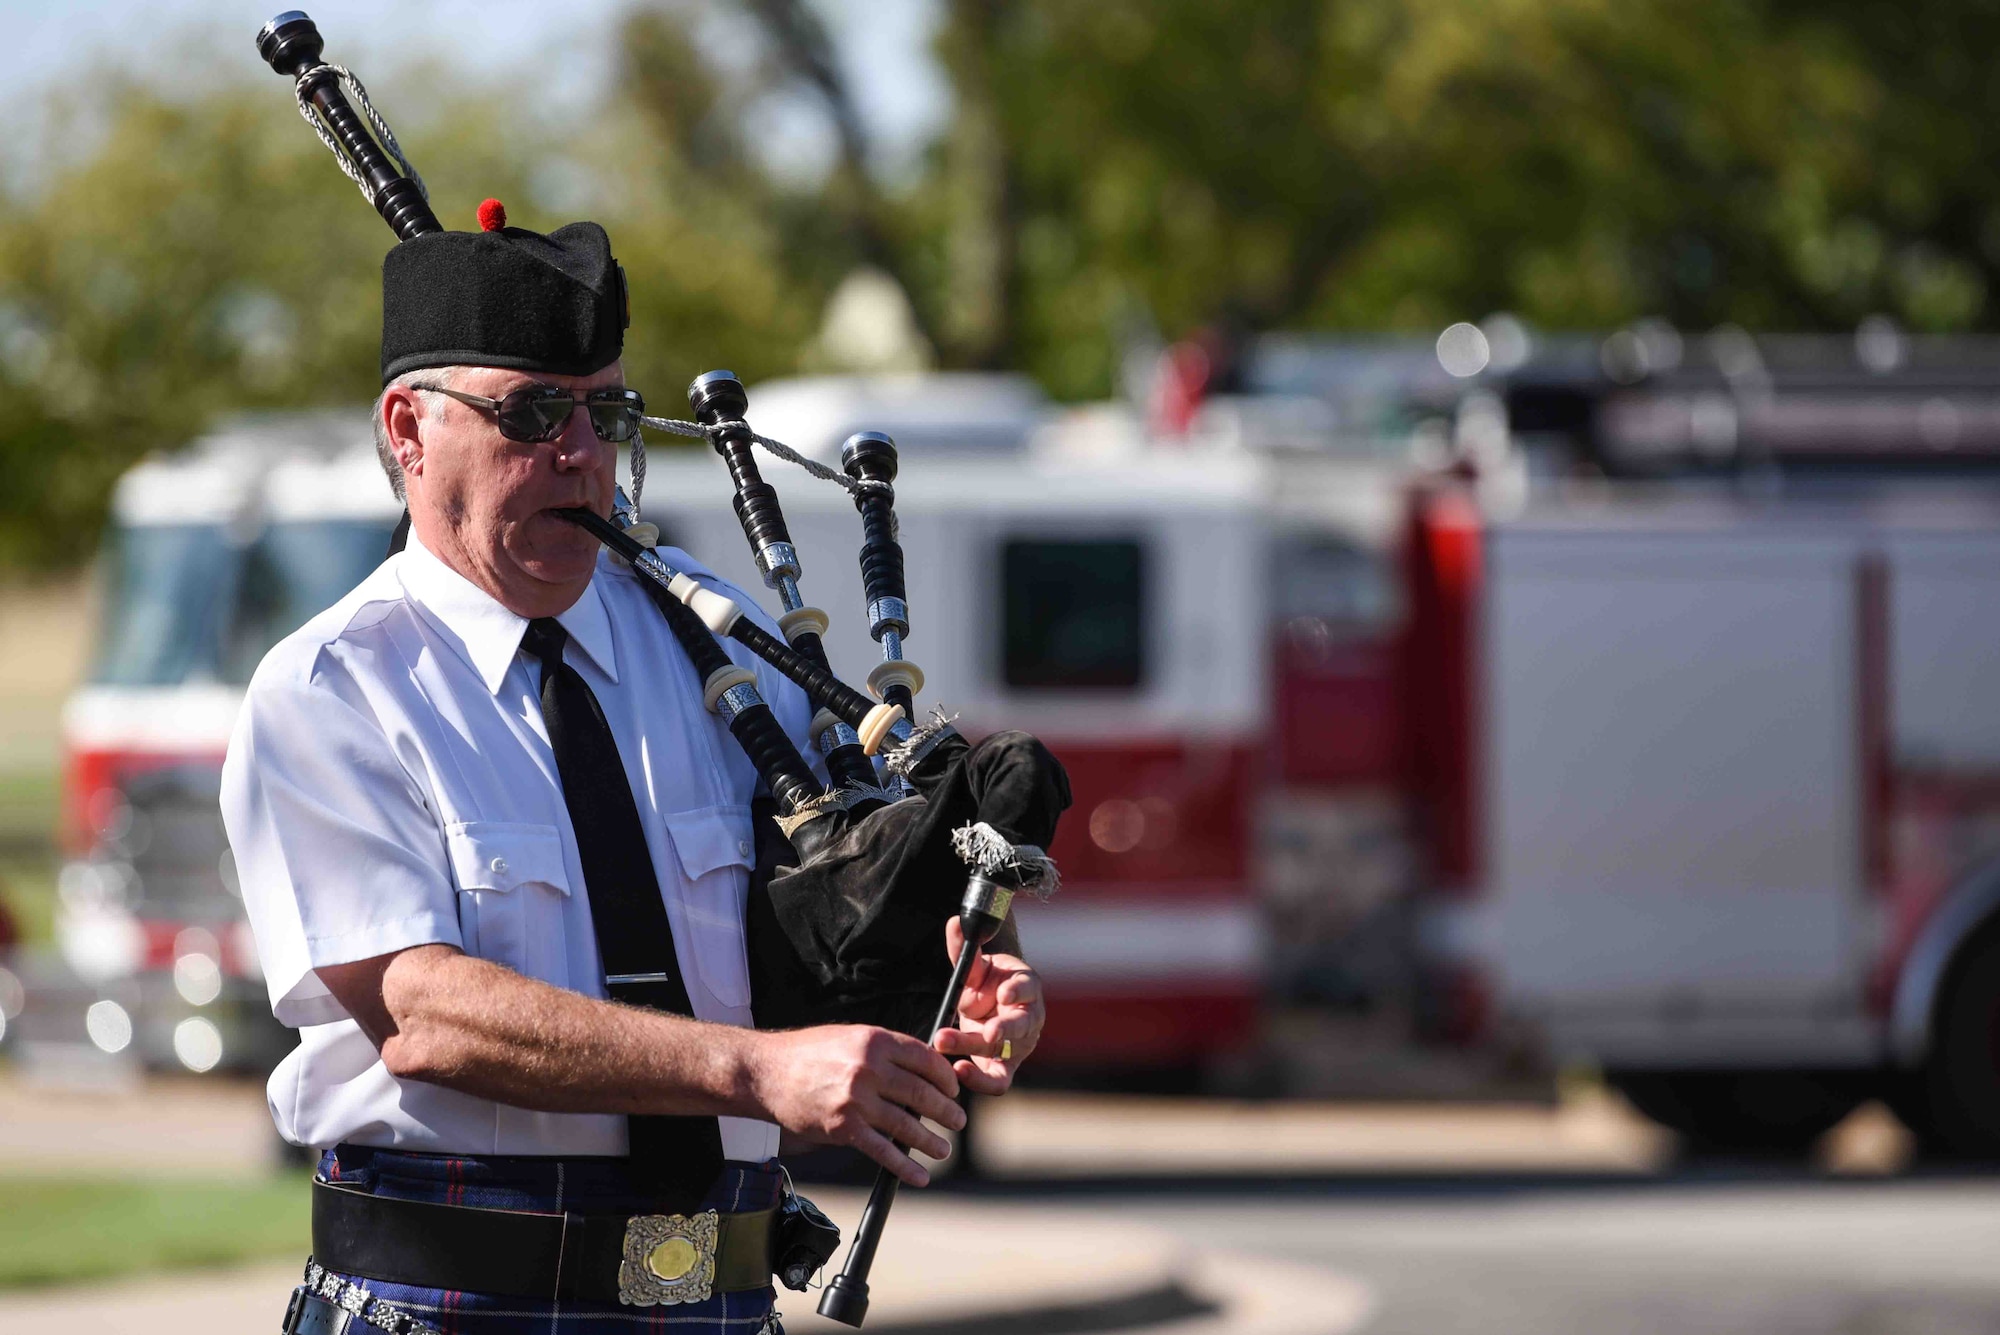 Jeff Fetter, Wichita Caledonian Pipes and Drums bagpiper, plays Amazing Grace during the Patriot Day Ceremony Sept. 11, 2019, at McConnell Air Force Base, Kan. The ceremony was held in honor of all the emergency first responders who gave their lives to save others on 9/11. (U.S. Air Force photo by Airman 1st Class Alexi Bosarge)